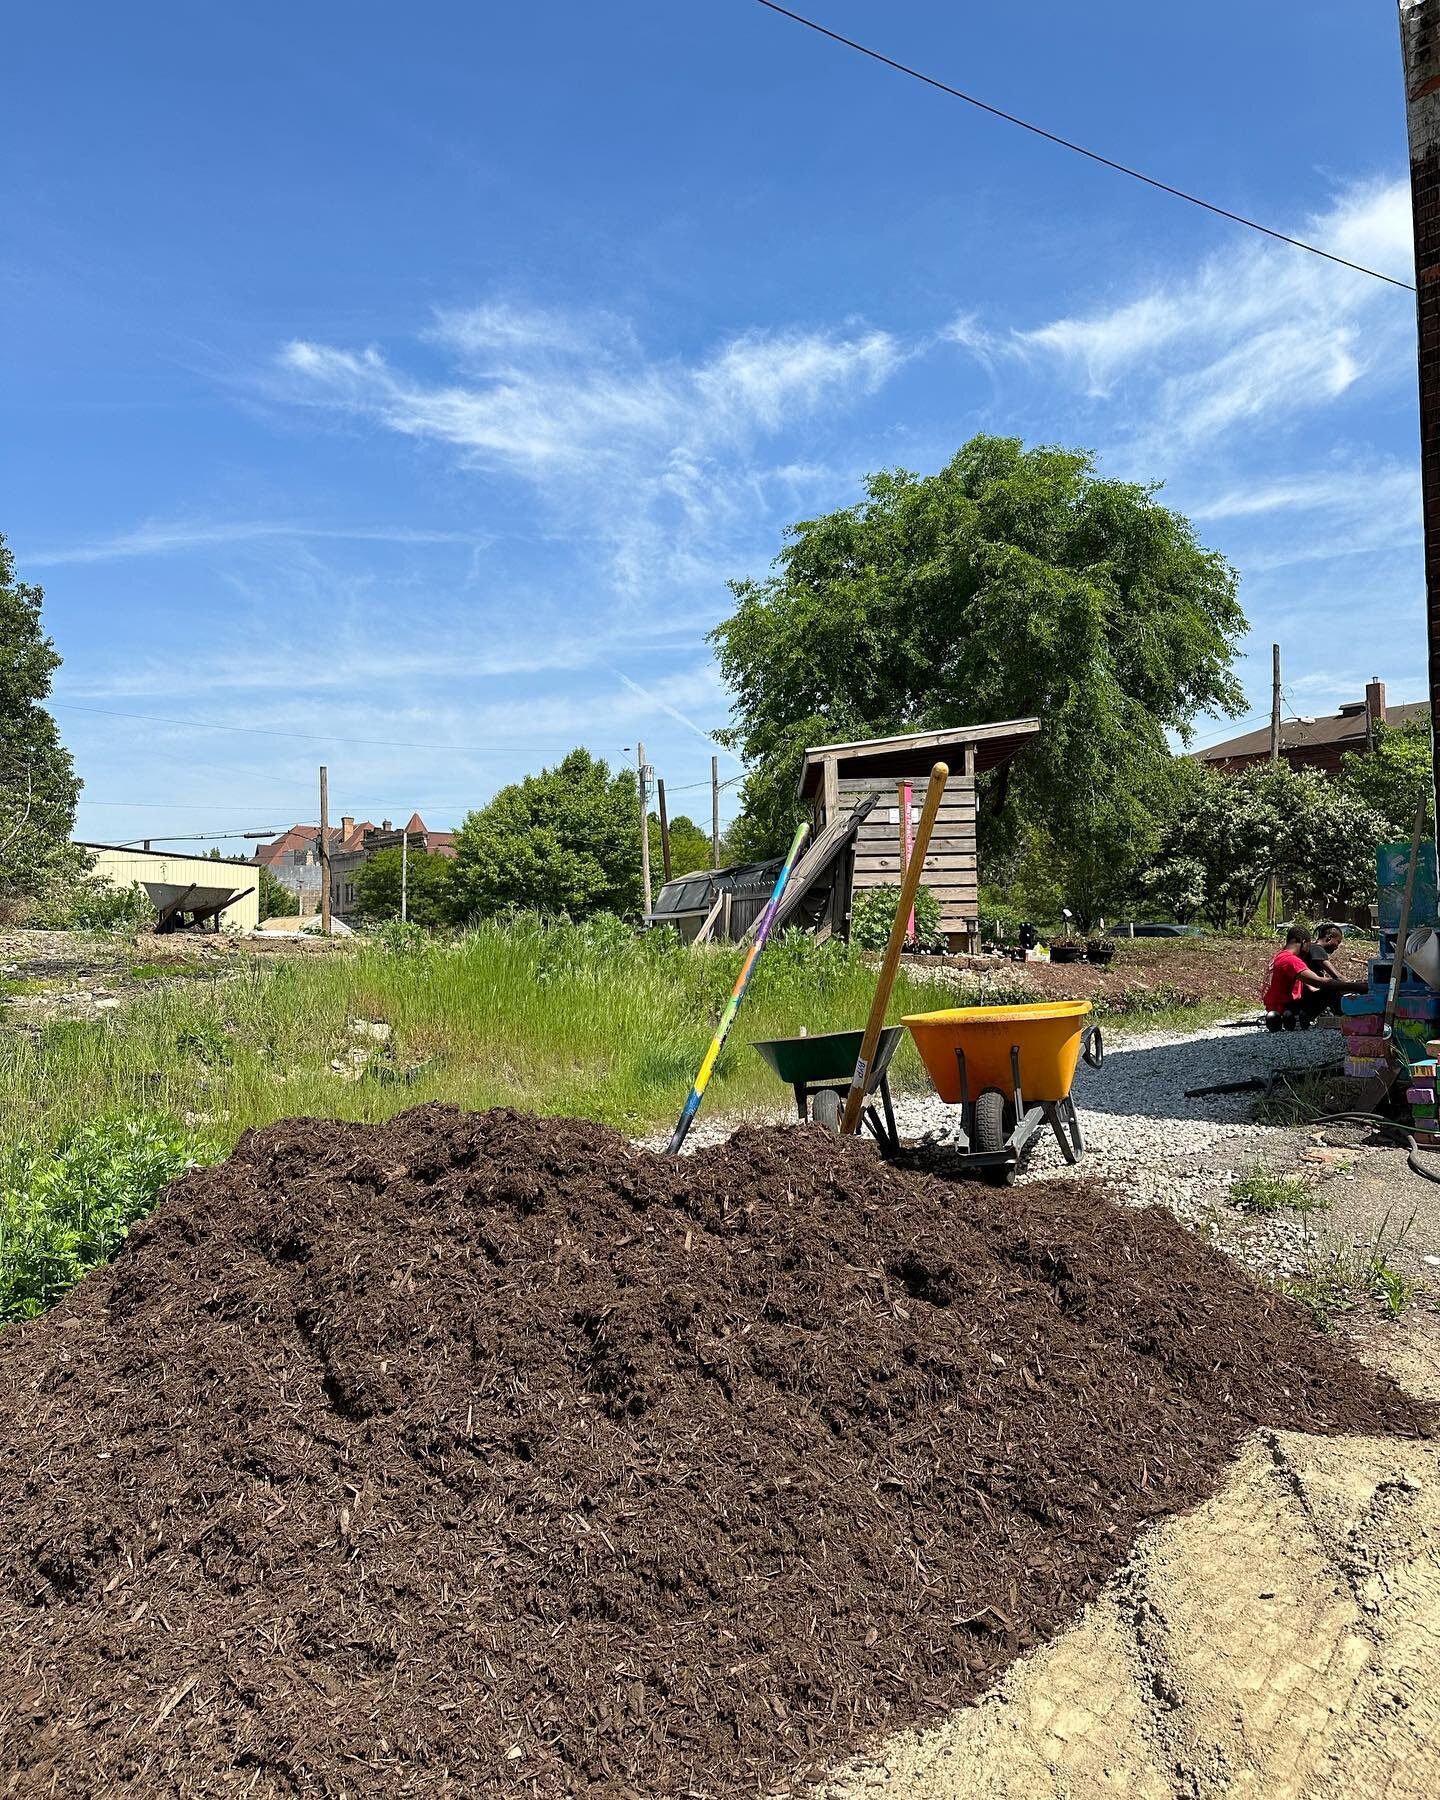 Call for volunteers!!!
Want to help? Next week (Monday, May 15, Wednesday, May 17 and Friday, May 19th) from 10:00 am - 1:00 pm we&rsquo;ll be out here trying to finish getting our lots ready for the season. Looking for people to mulch, weed, plant, 